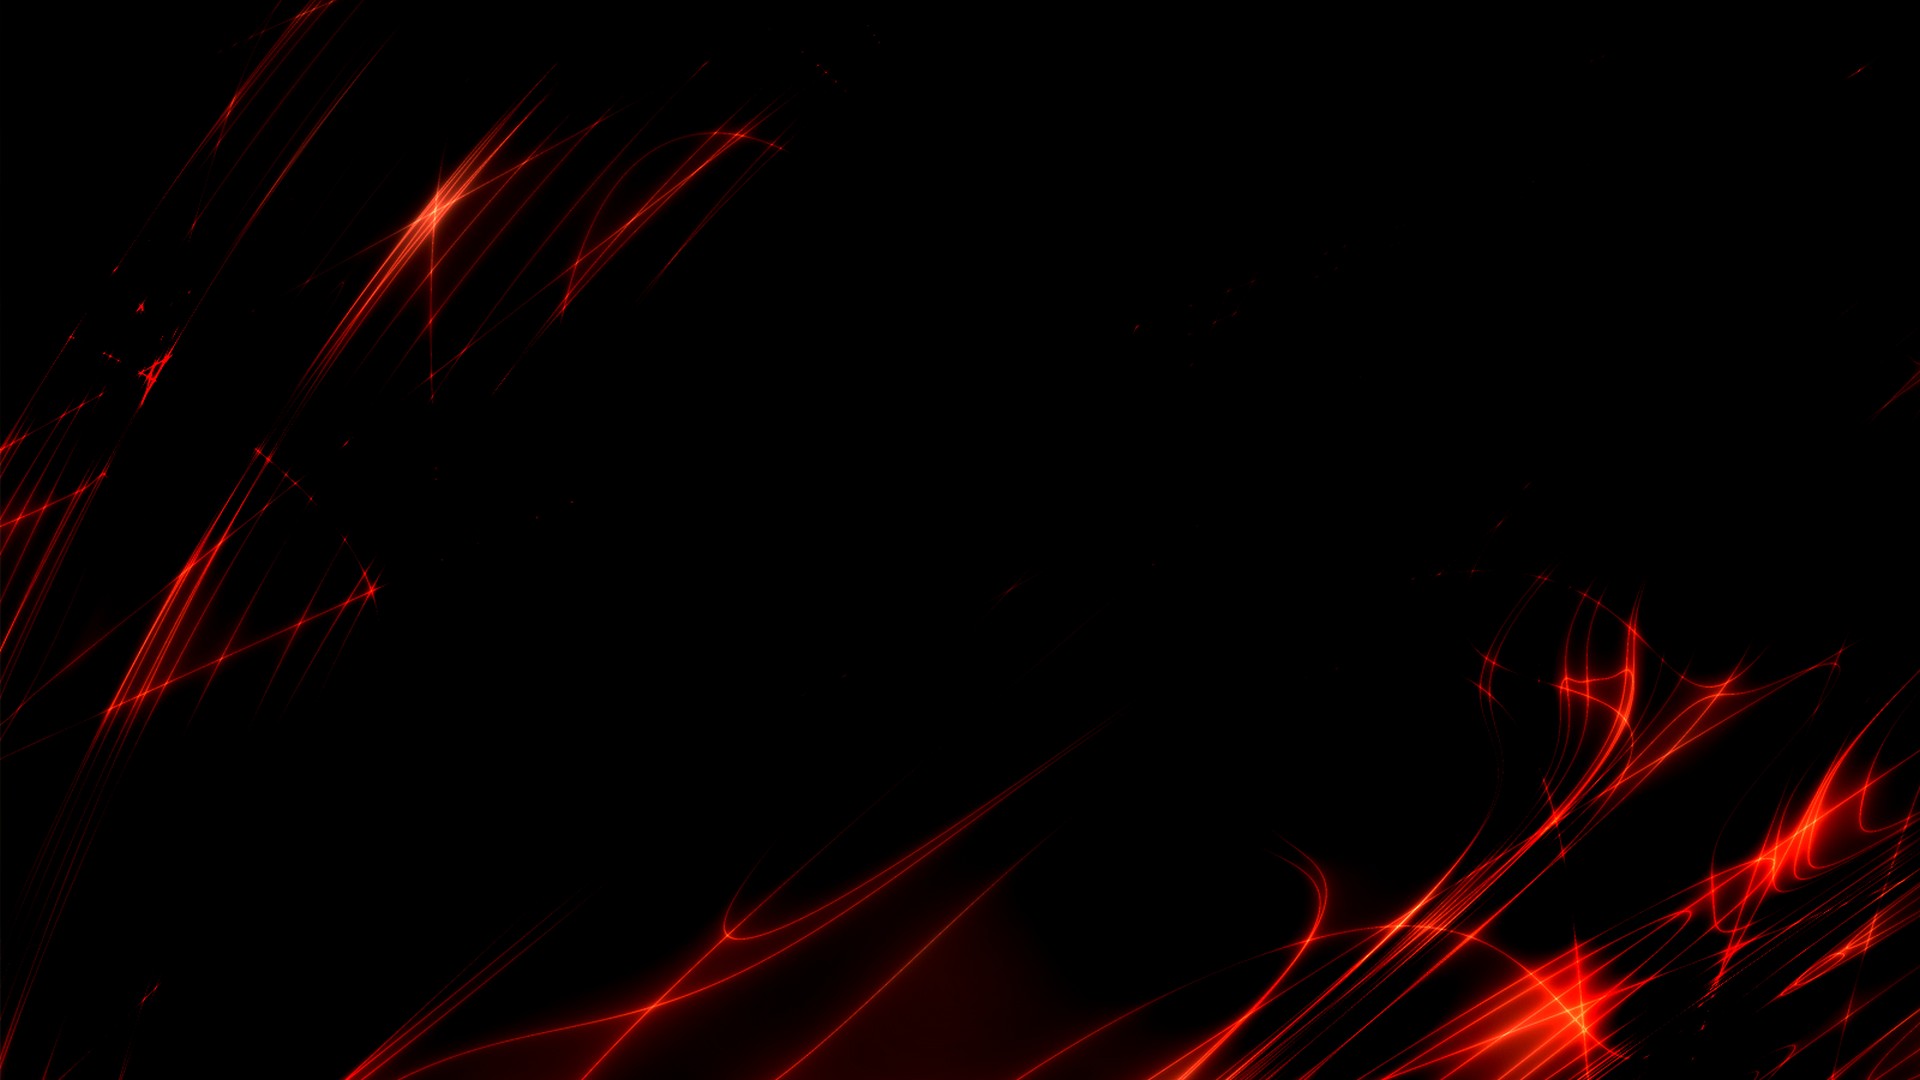 Wallpaper HD Black and Red With high-resolution 1920X1080 pixel. You can use this wallpaper for your Desktop Computer Backgrounds, Mac Wallpapers, Android Lock screen or iPhone Screensavers and another smartphone device